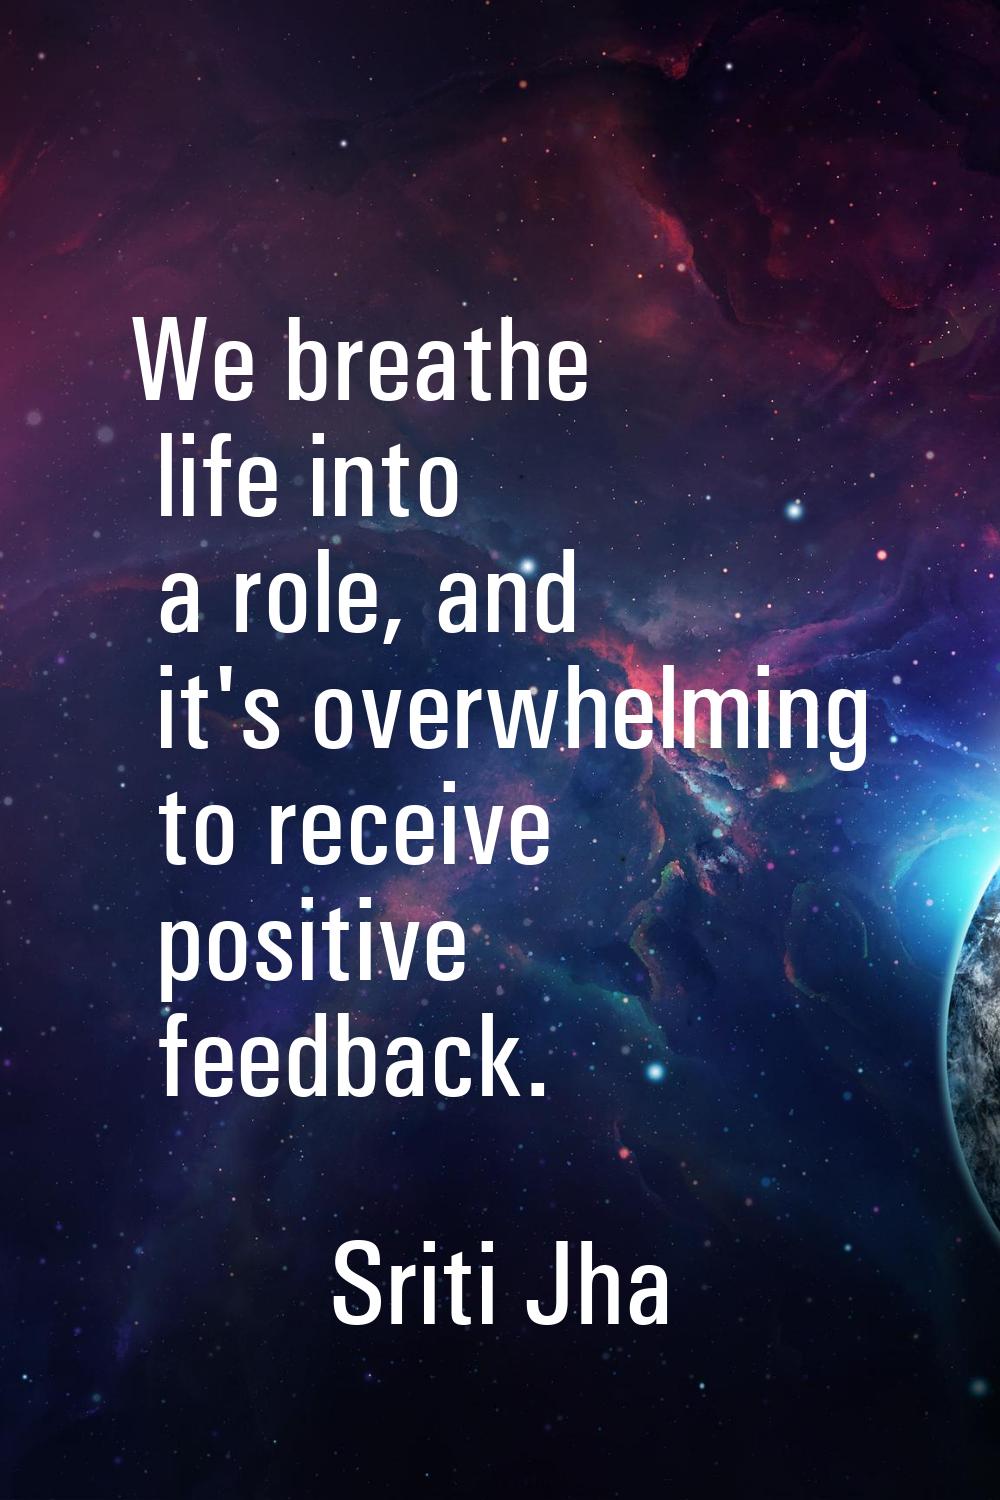 We breathe life into a role, and it's overwhelming to receive positive feedback.